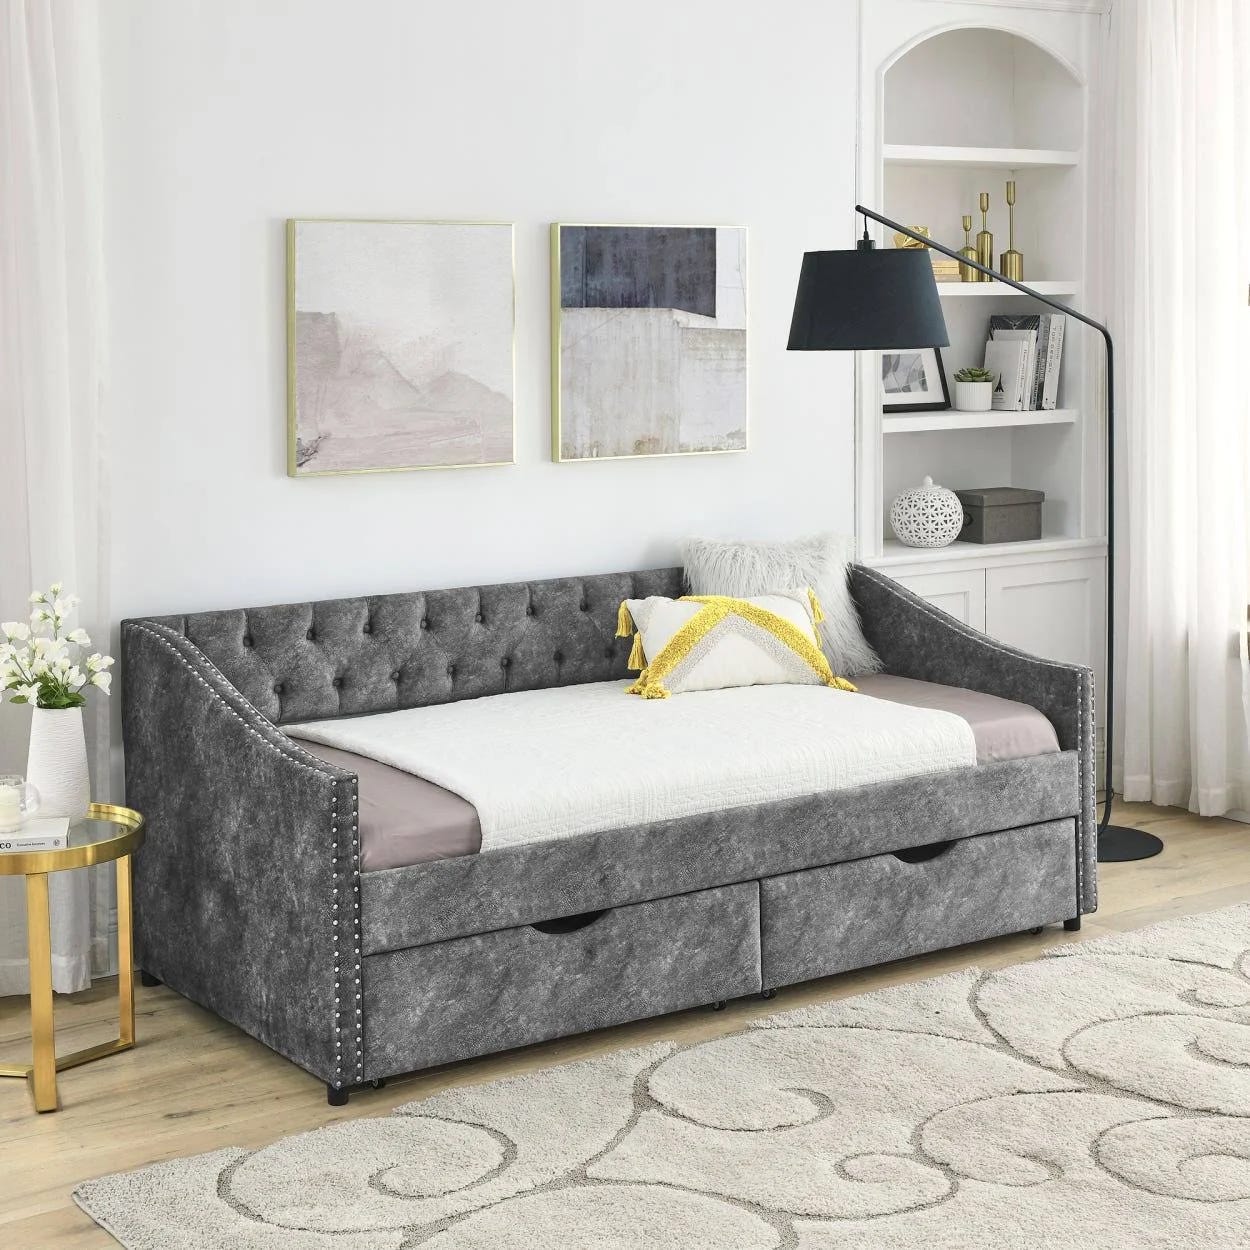 Twin-Size Tufted Daybed with Drawers and Copper Nail Arms | Image